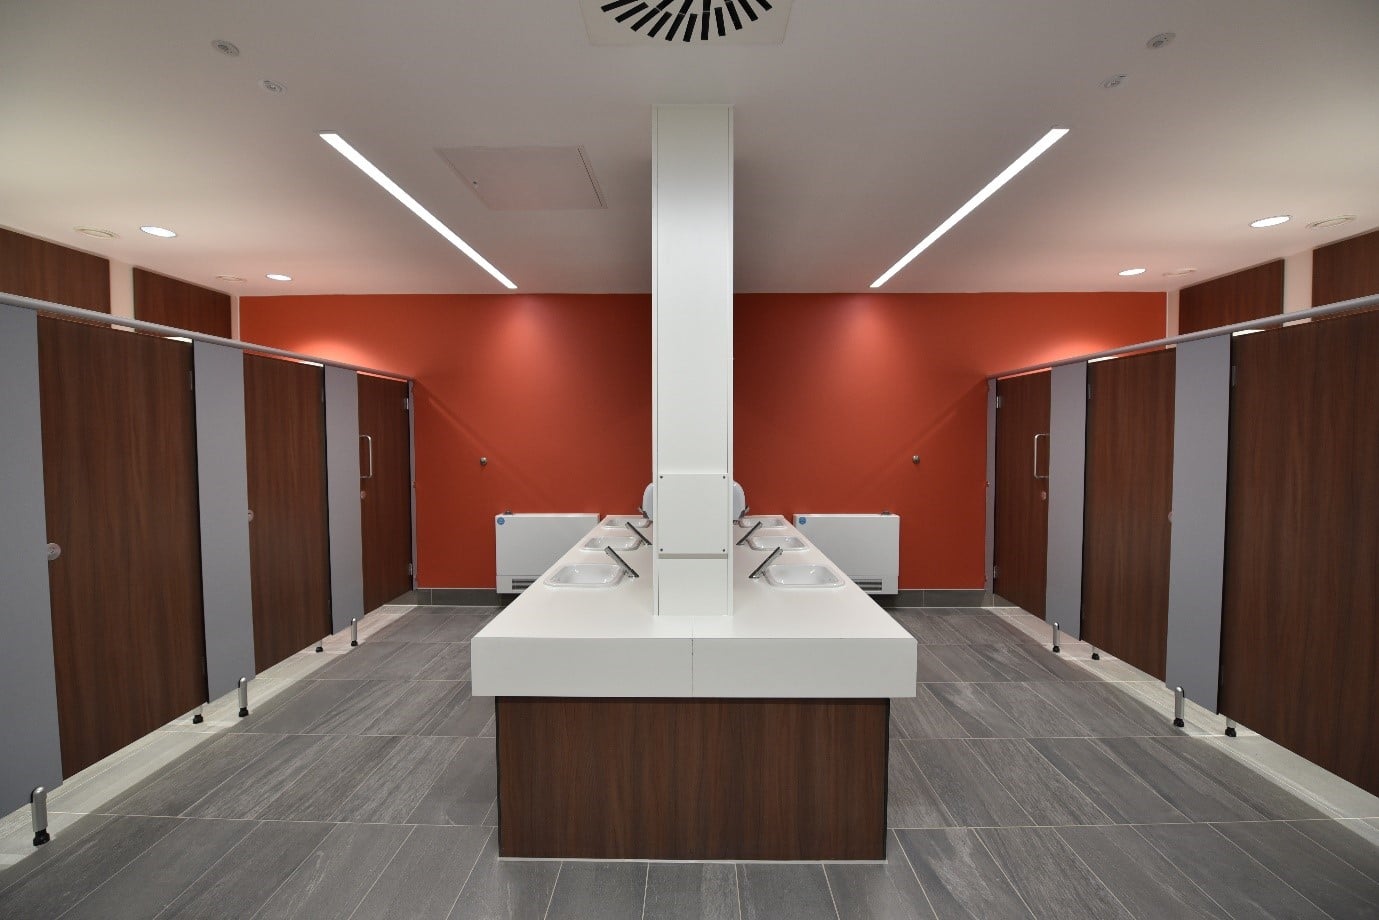 An example of the university washrooms which we provided for Coventry University.